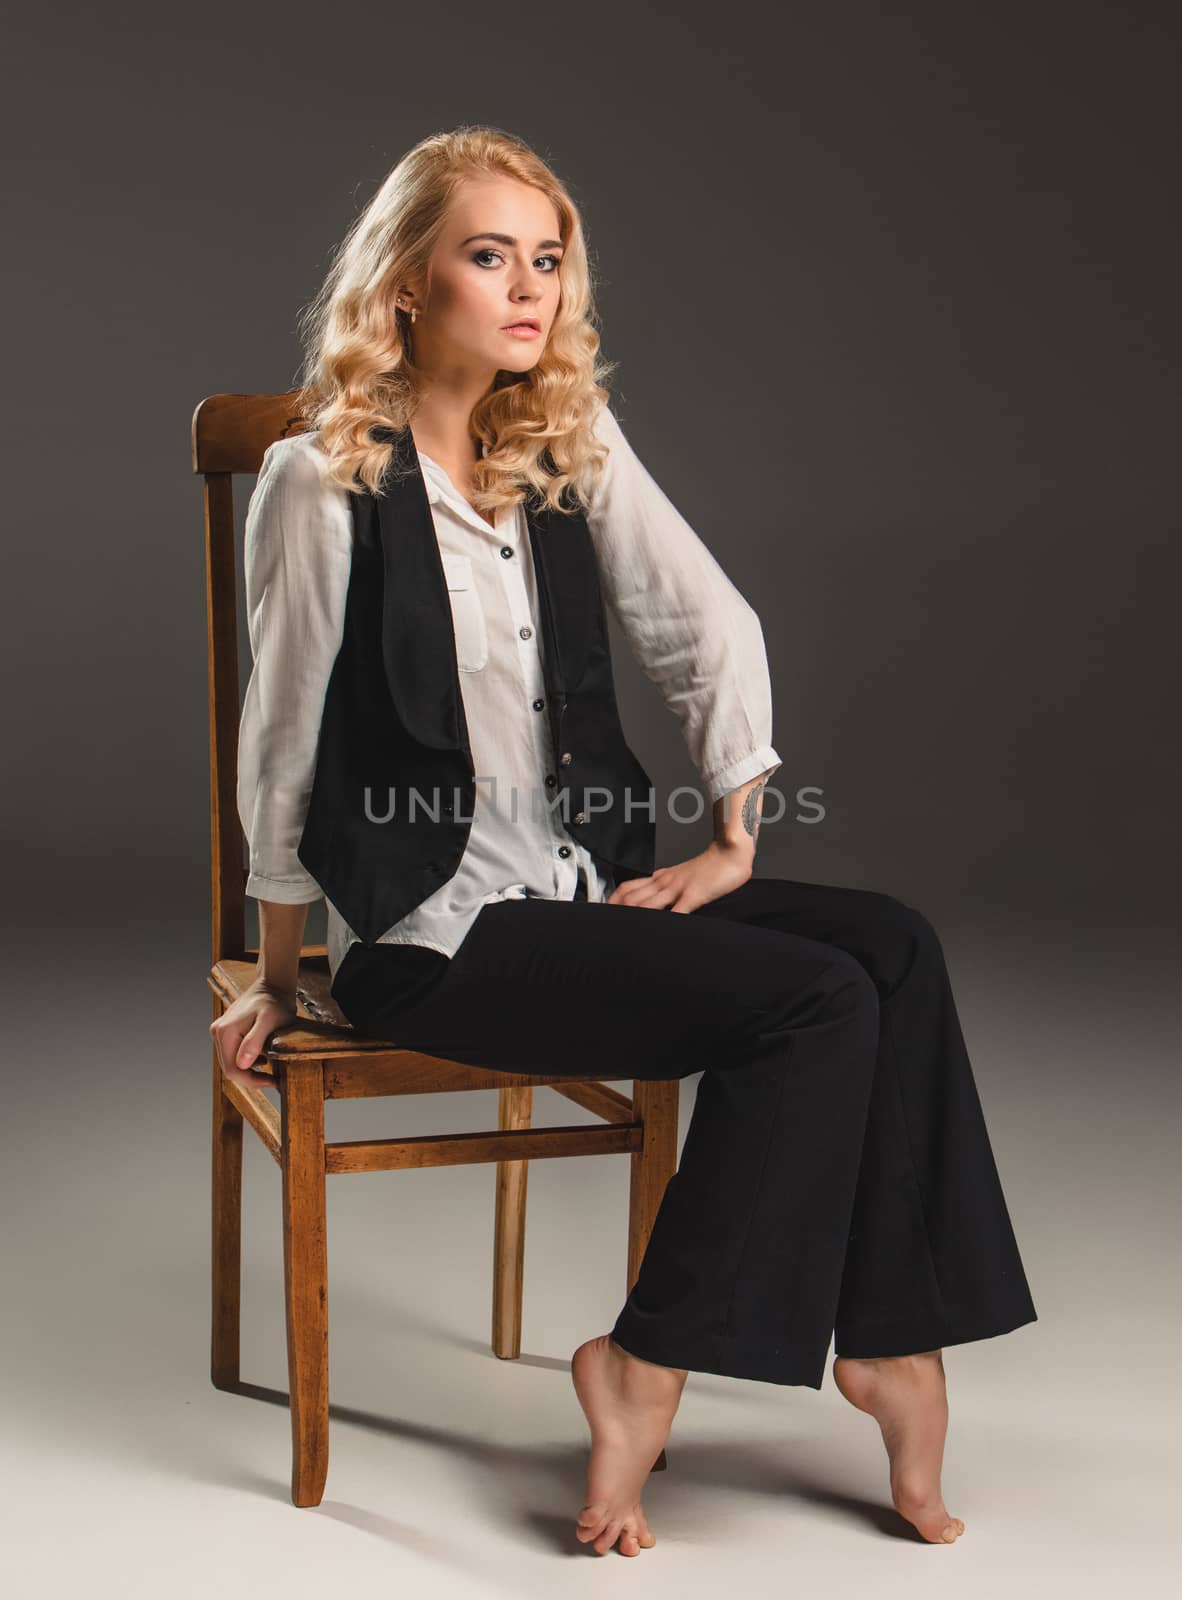 Beauty blond woman  in a black suit and white shirt, sitting on a chair on a gray background